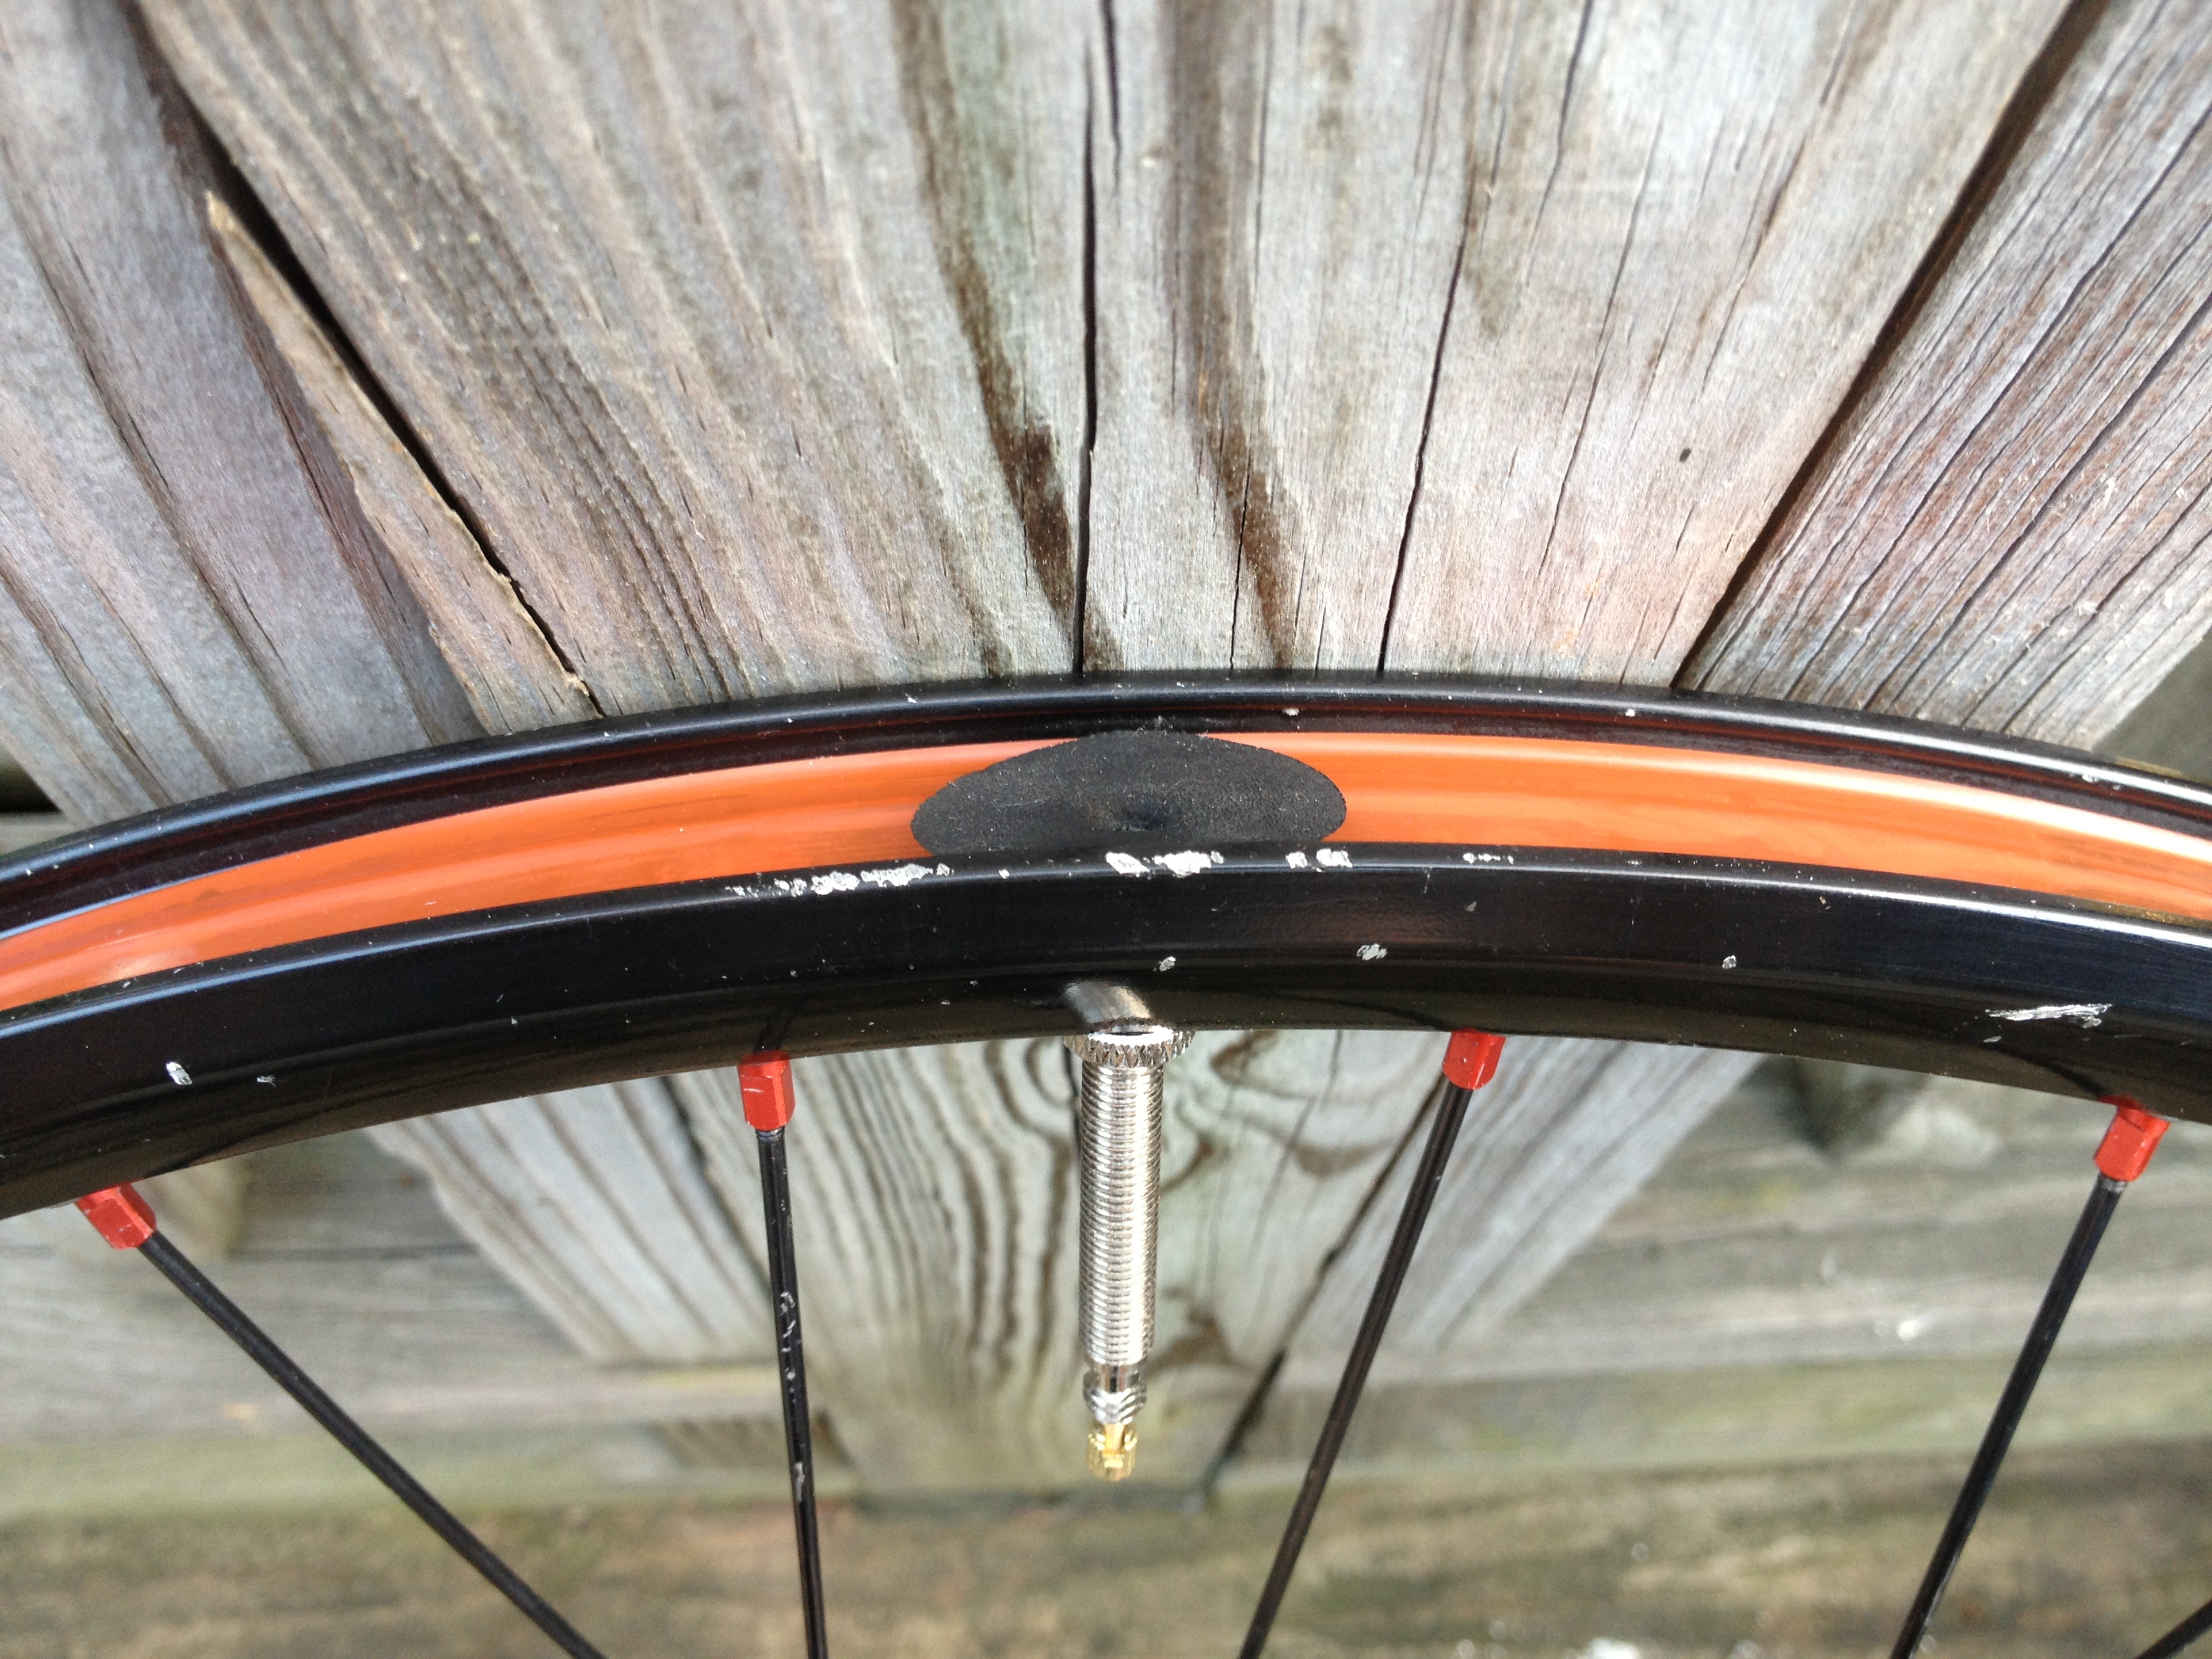 Turbine Sightseeing halvt Going Tubeless: How to Convert Your Existing Rims | Montague Bikes